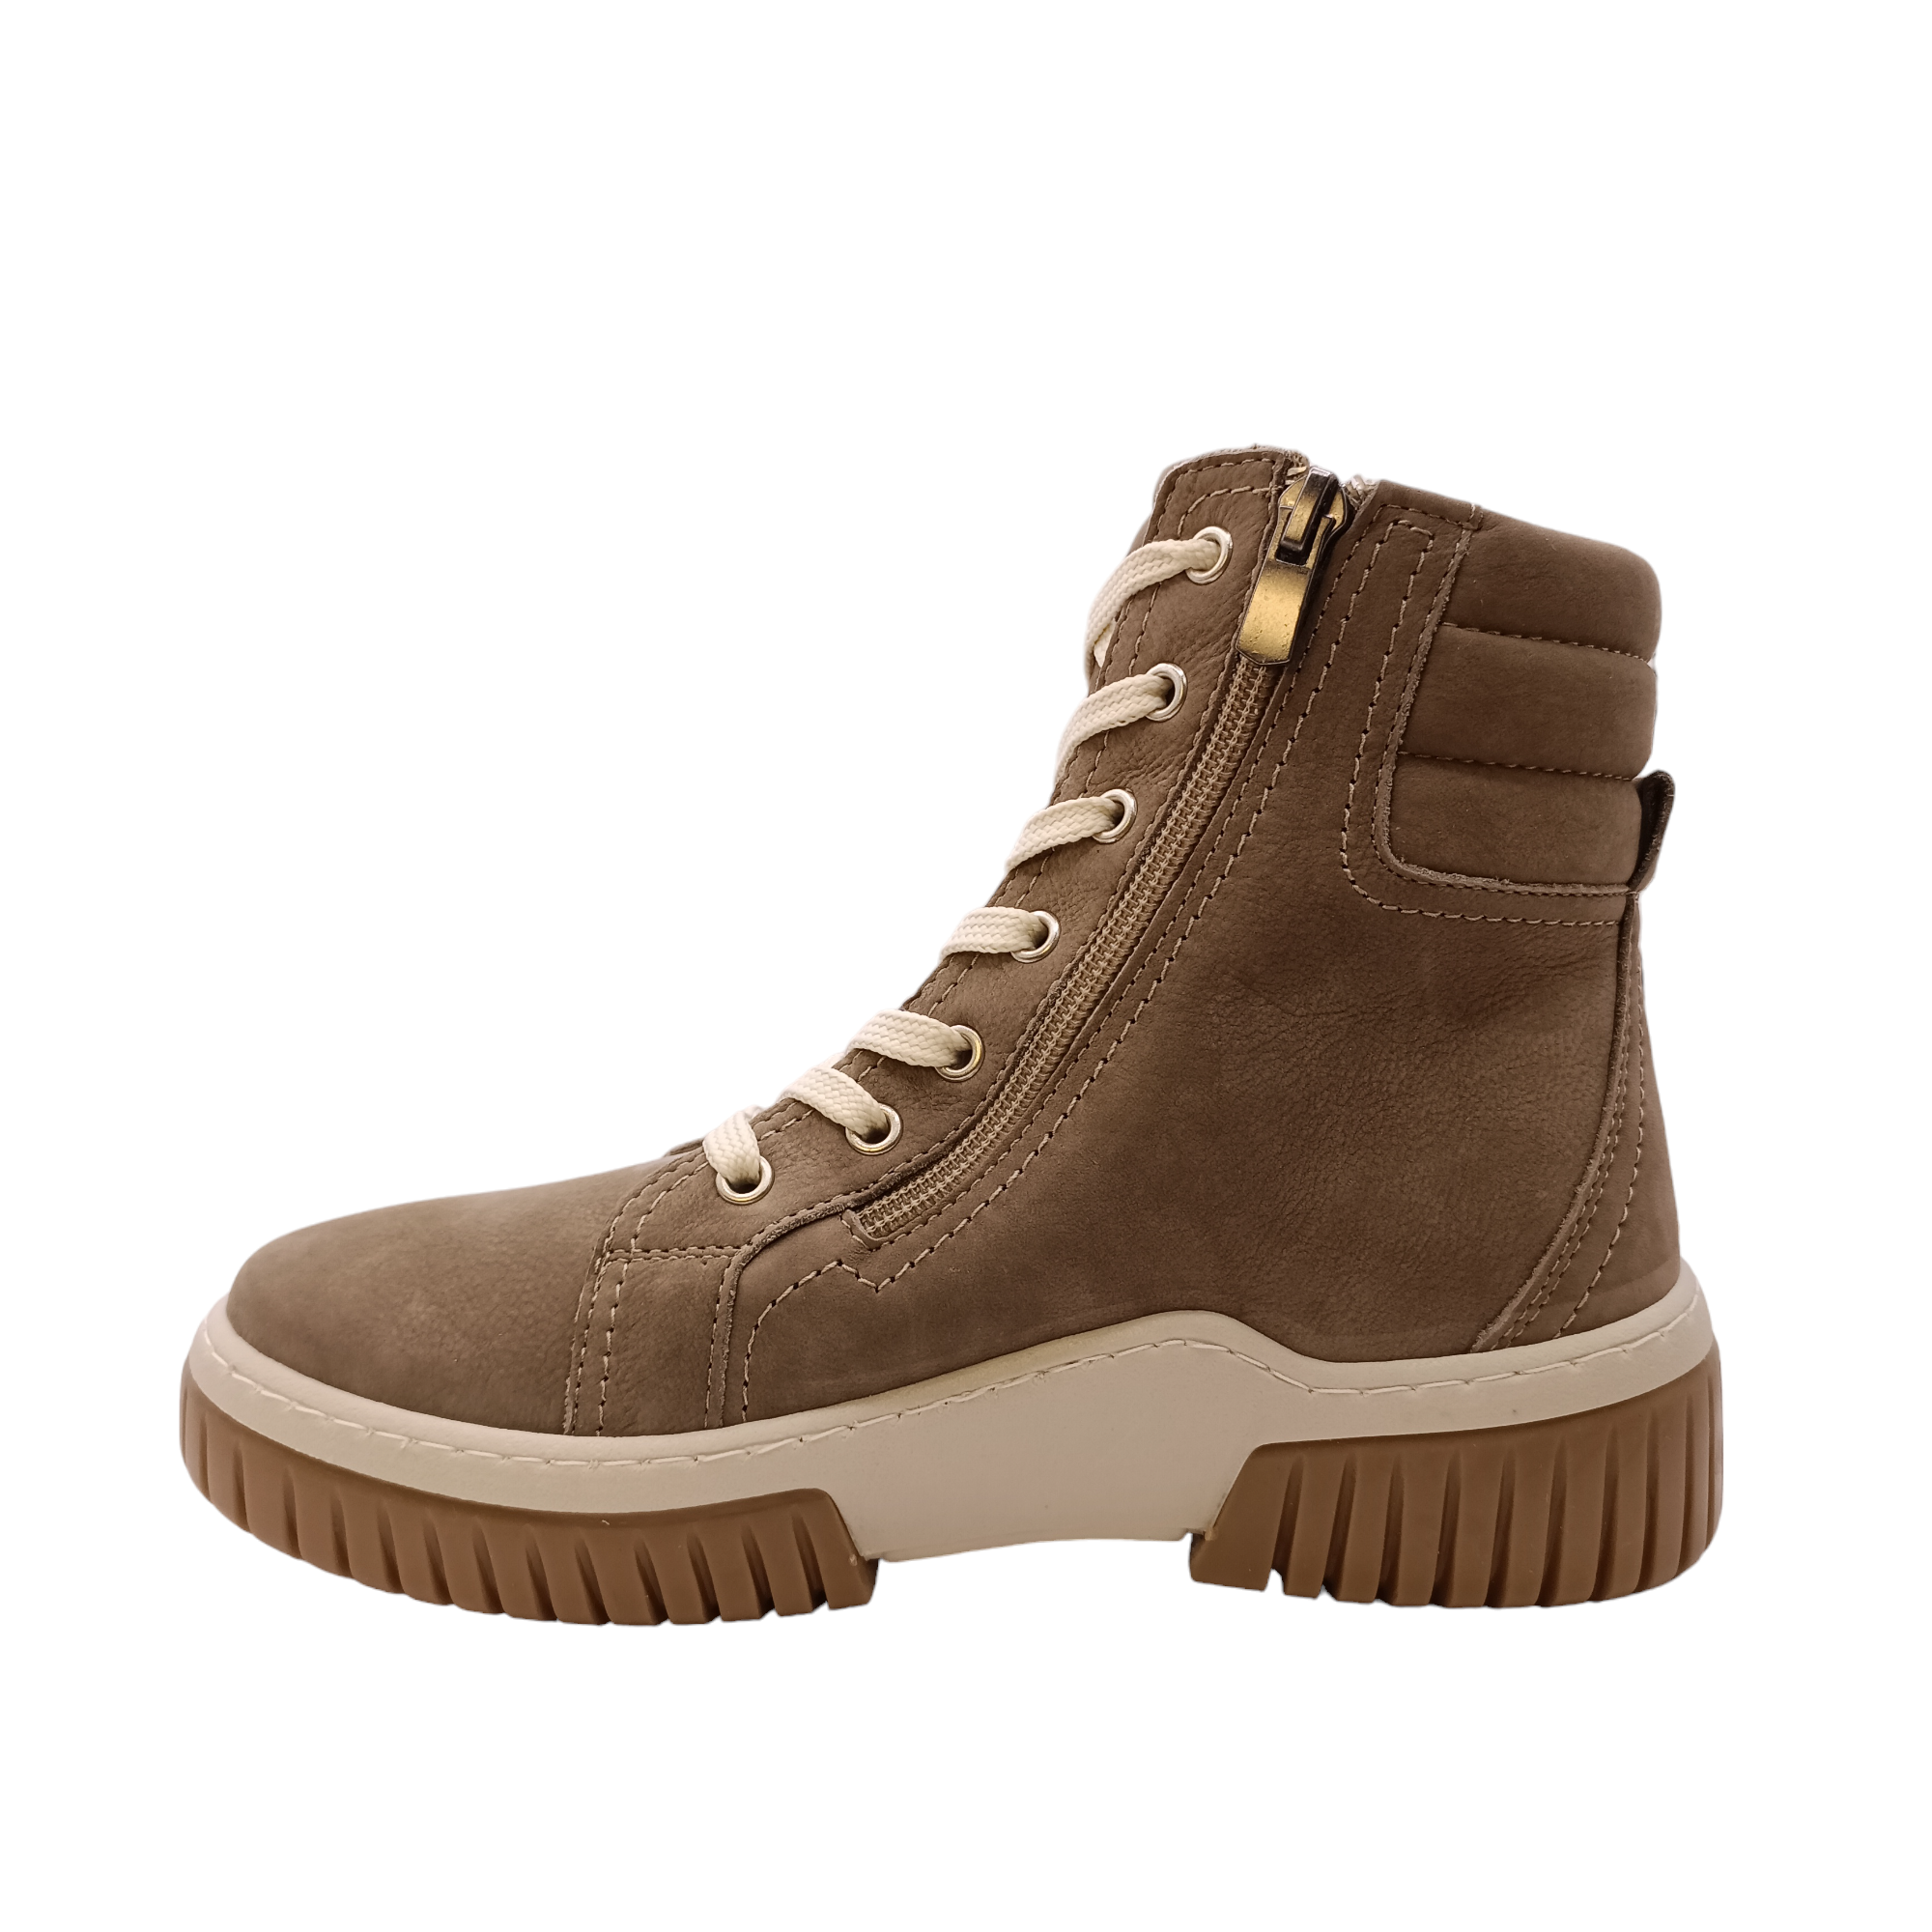 Side view of the boot Petra from Cabello. Soft Turkish taupe coloured leather boot with side zip and light coloured sole and laces. Padded ankle with ruggered grip. Shop Womens Boots Online and In-store with shoe&me Mount Maunganui Tauranga NZ.